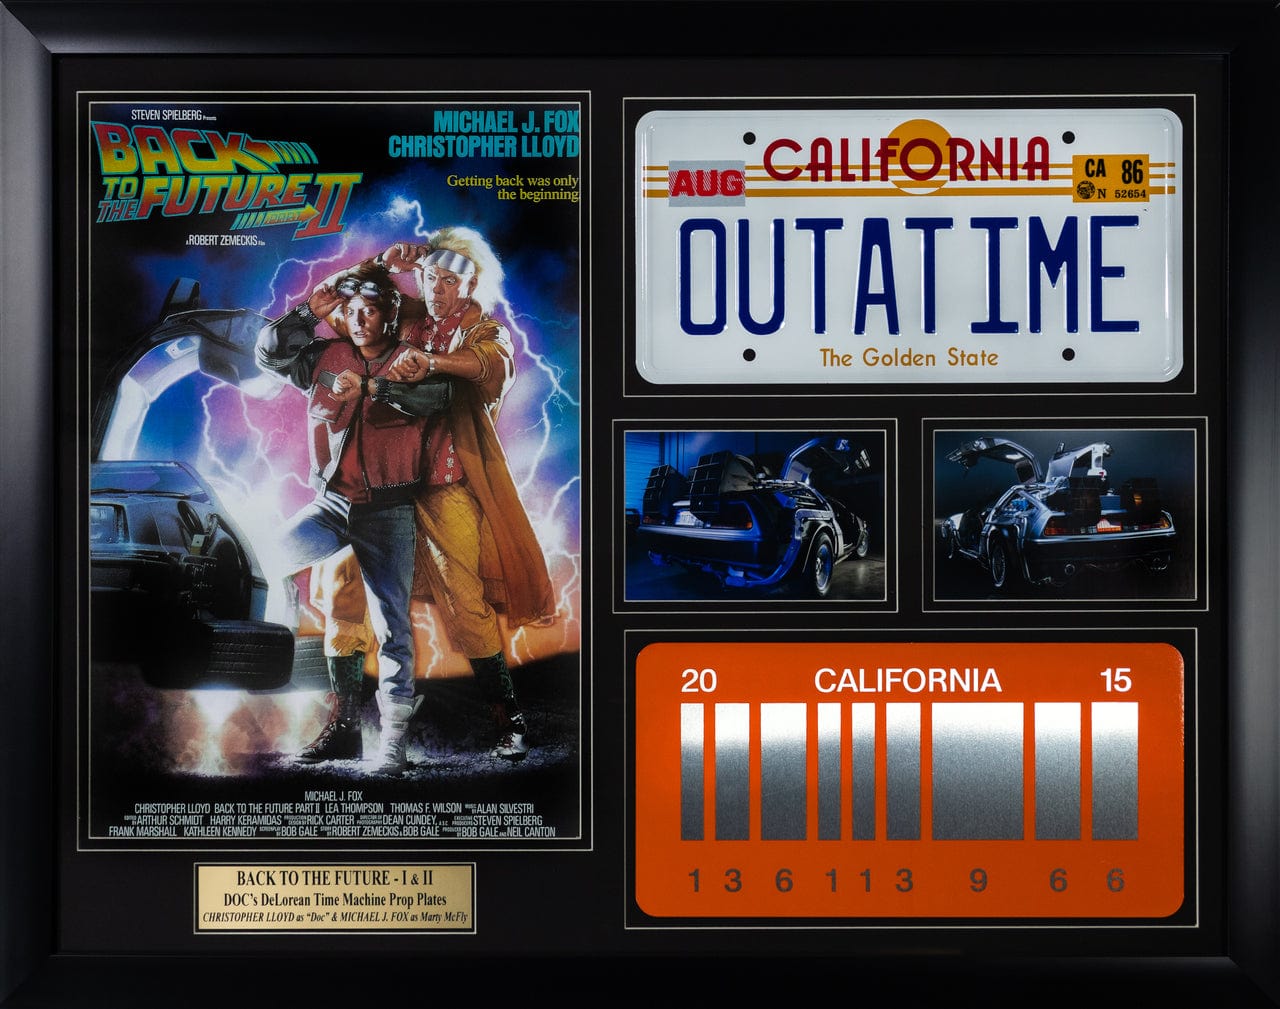 Back to the Future Part II Collectible – Gold & Silver Pawn Shop